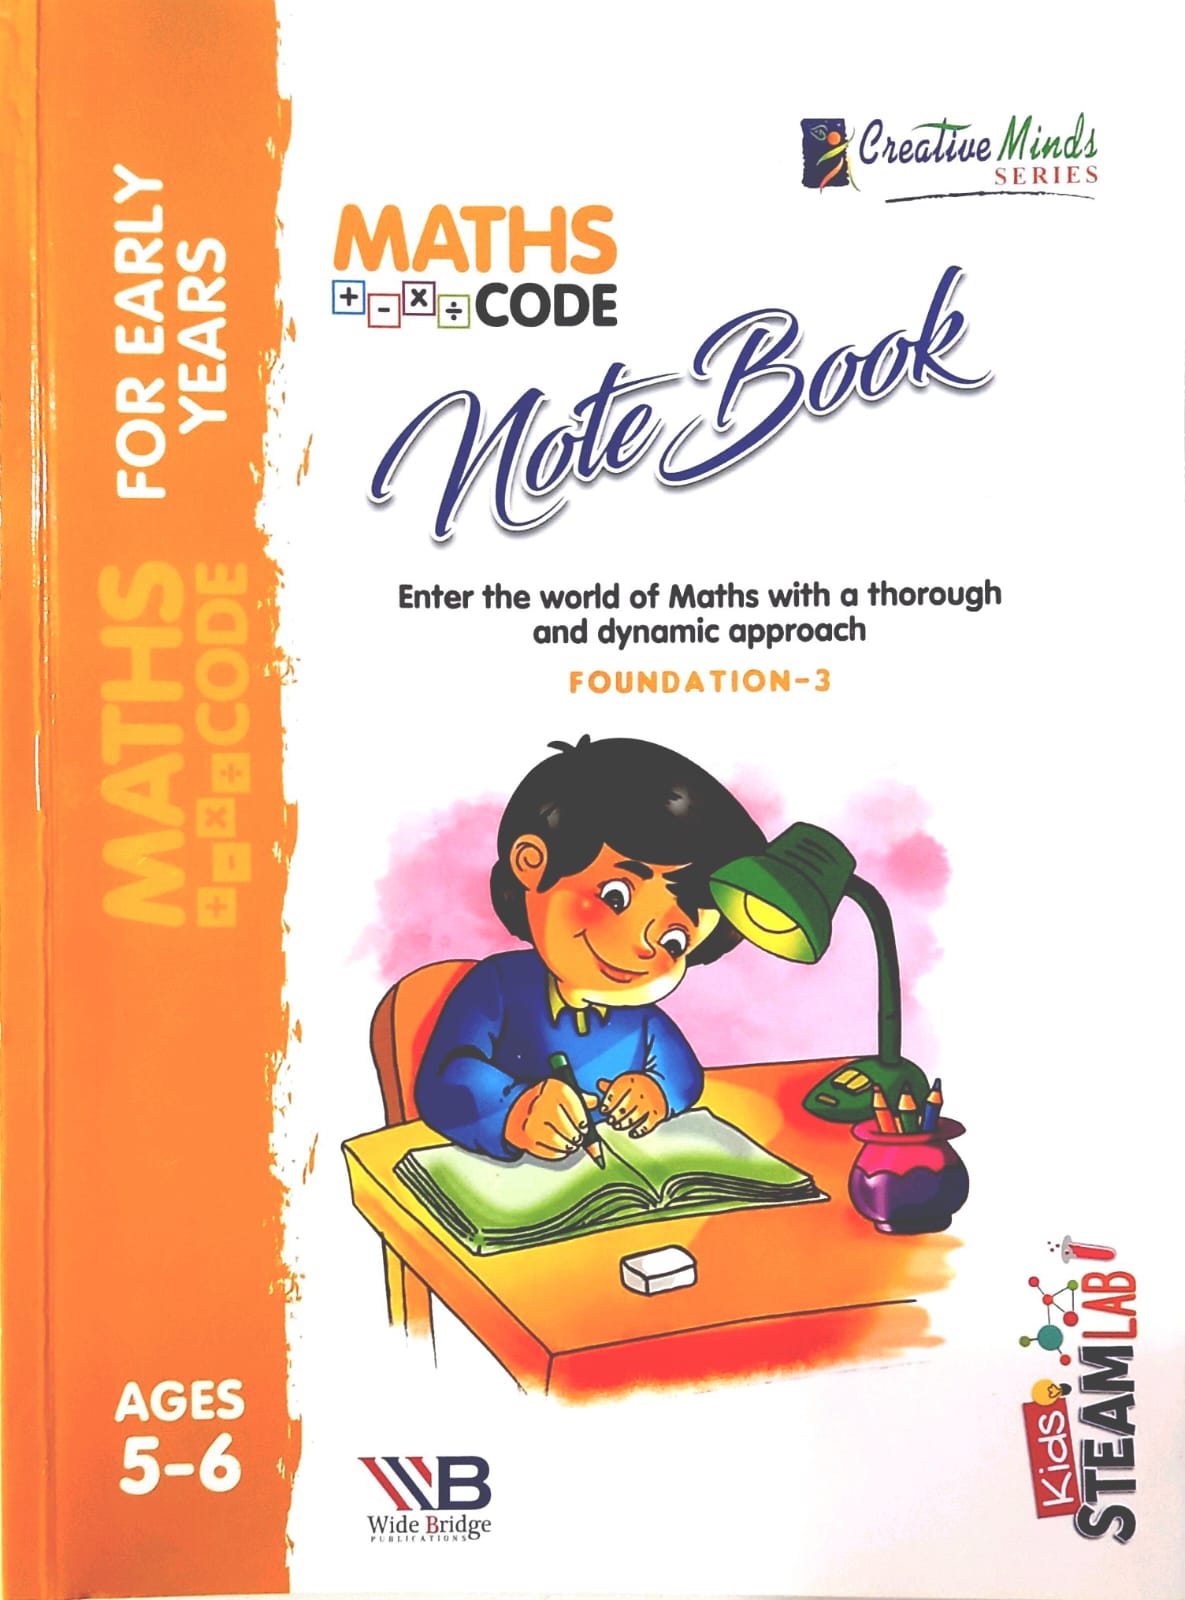 Math　3-　BookStores　Code　The　Notebook:　Ages　Learners-　Skills　Key　for　Early　Foundation　–　BIG